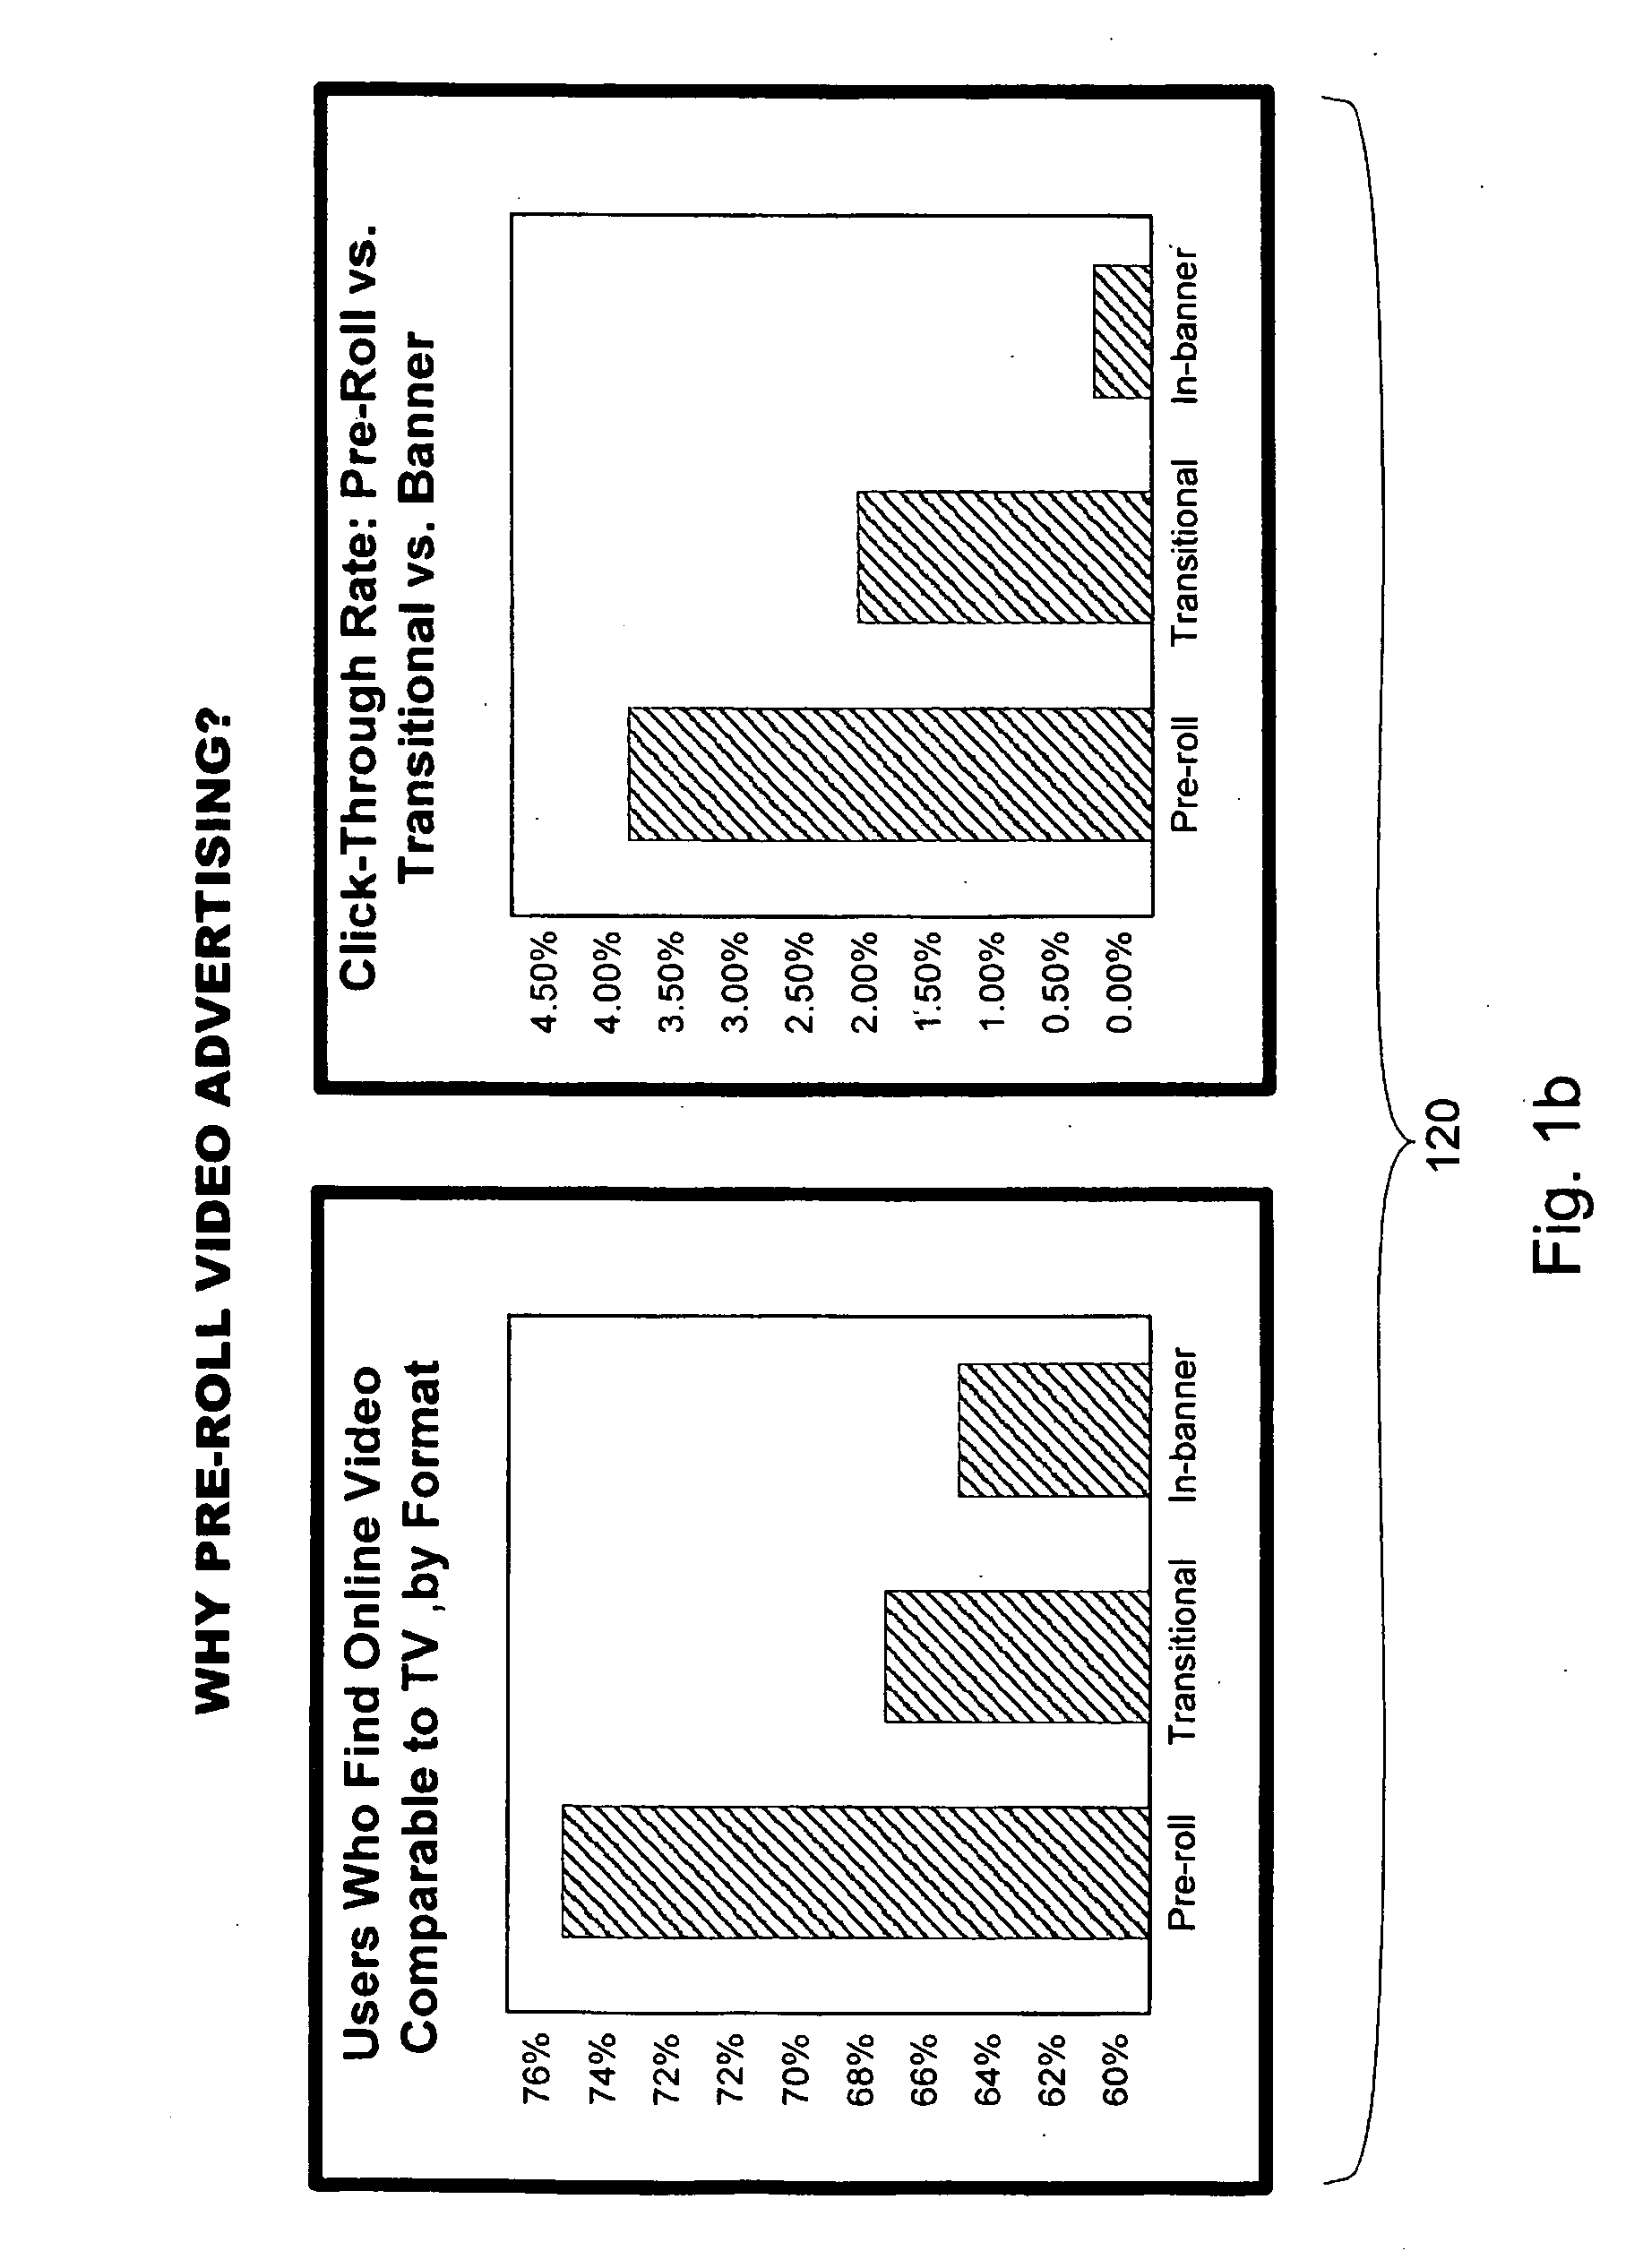 System and method for dynamic generation of video content